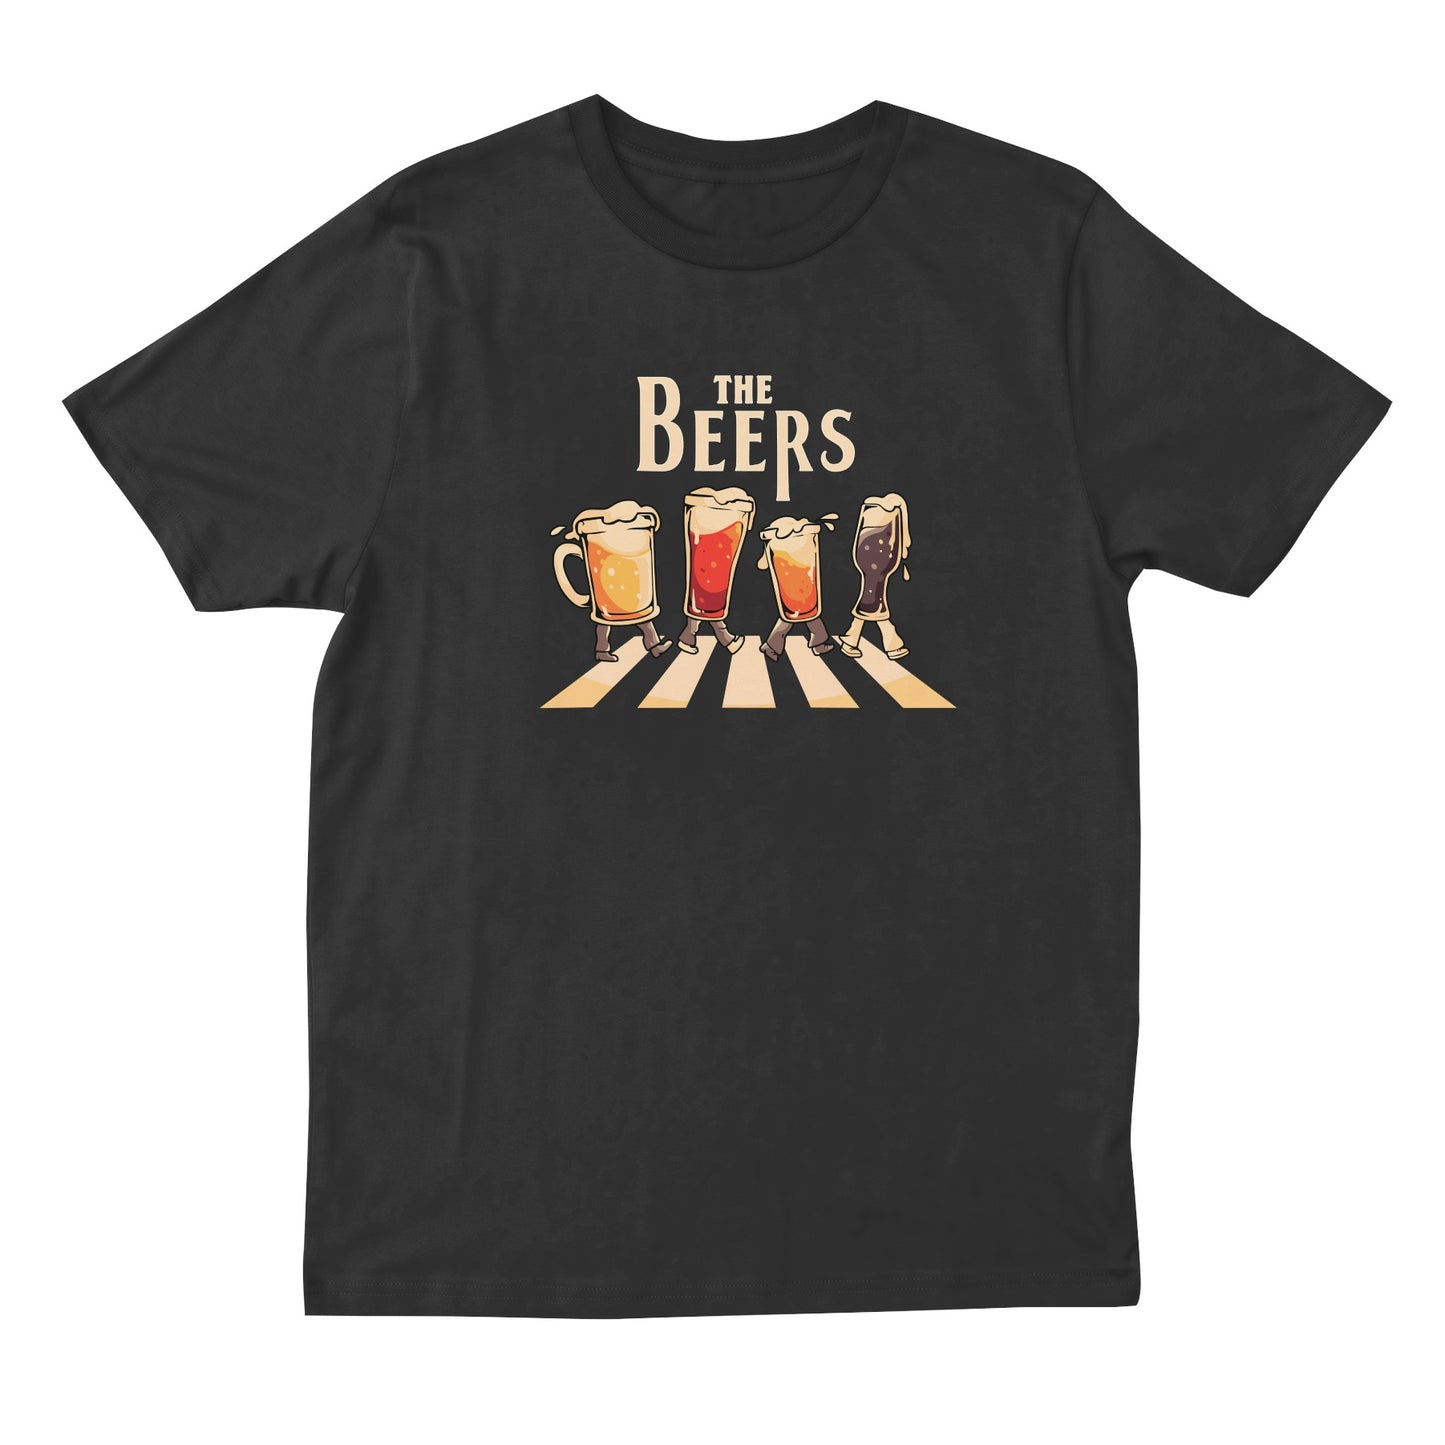 the beers t shirt - black